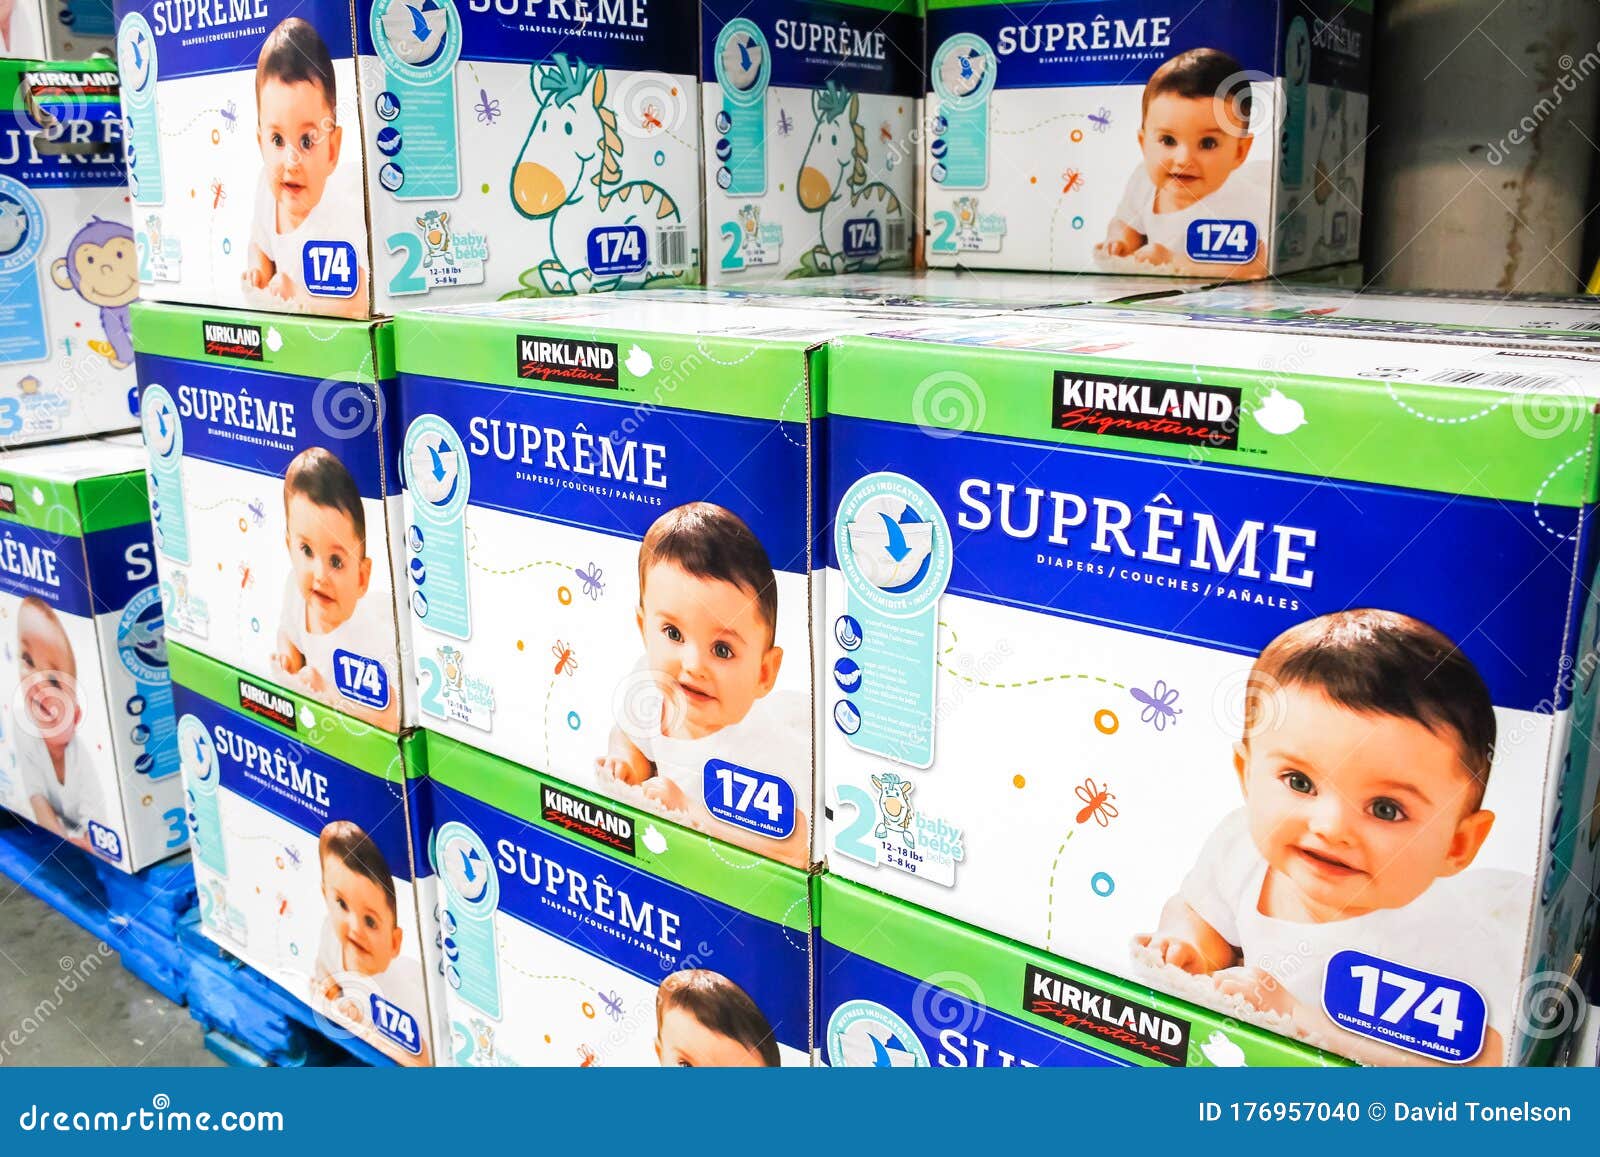 are costco kirkland diapers made by huggies